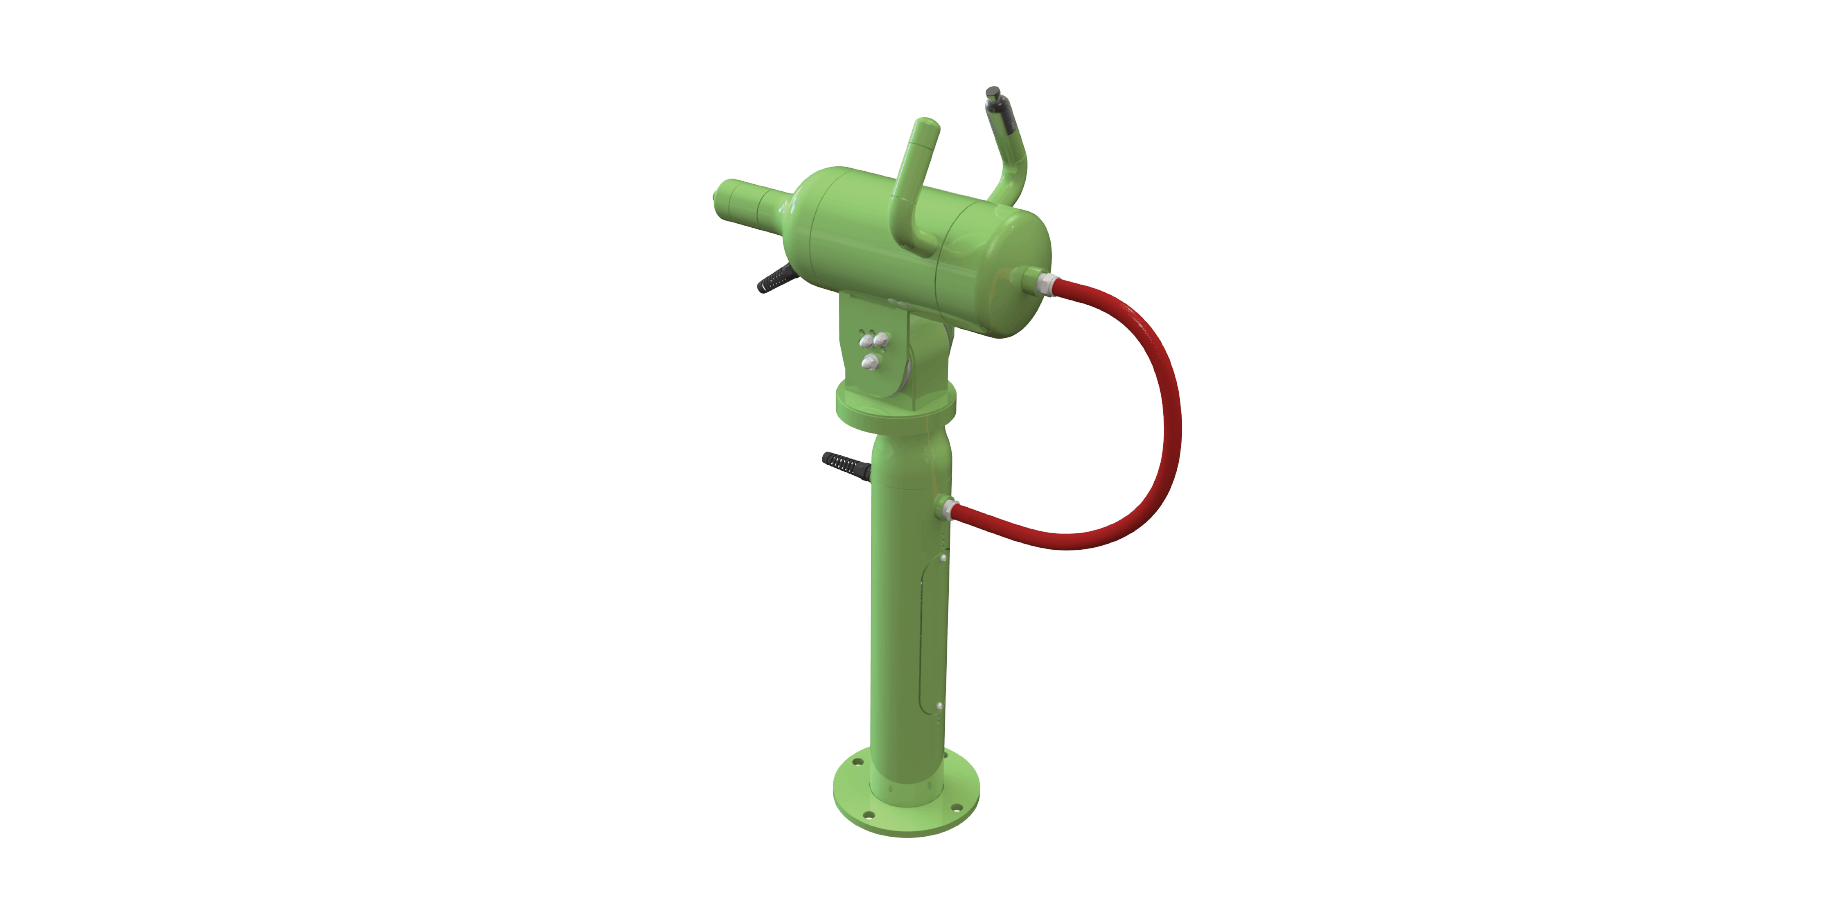 Rusher Commercial Water Play Feature - The rusher water toy feature is an air powered water blaster for installation at commercial waterparks or splash pads.